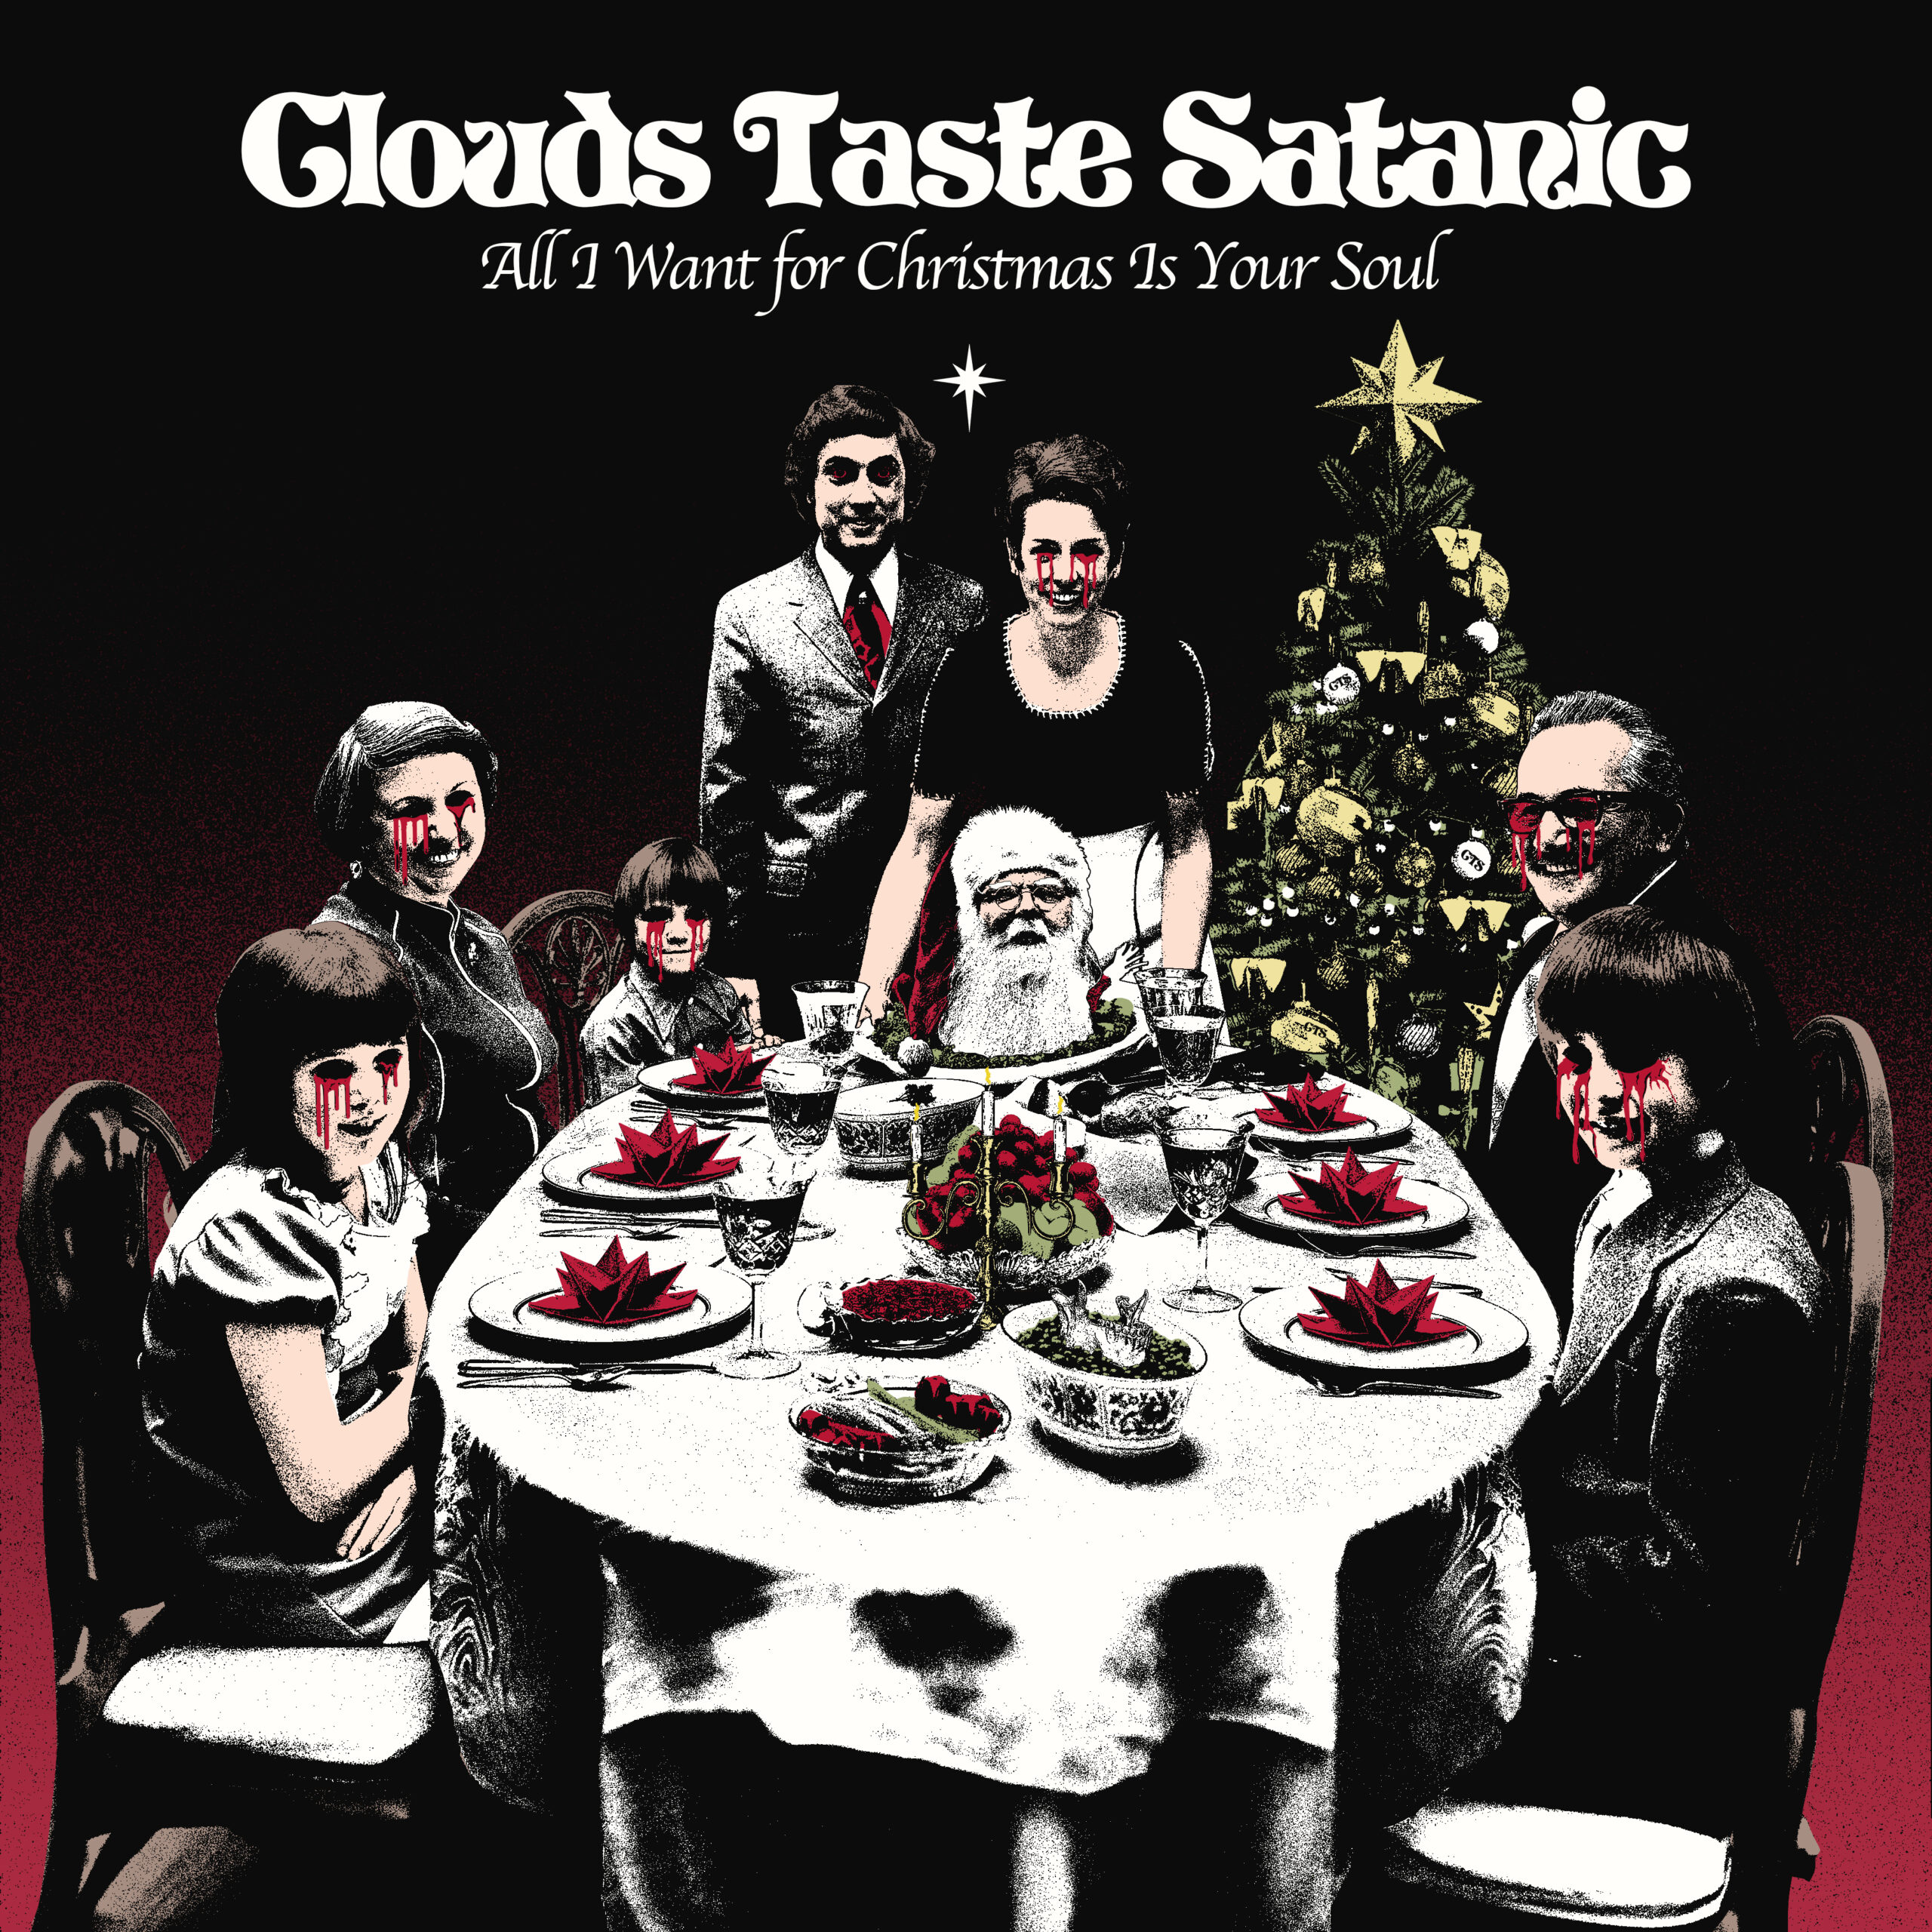 Clouds Sound Satanic – All I Want For Christmas is Your Soul